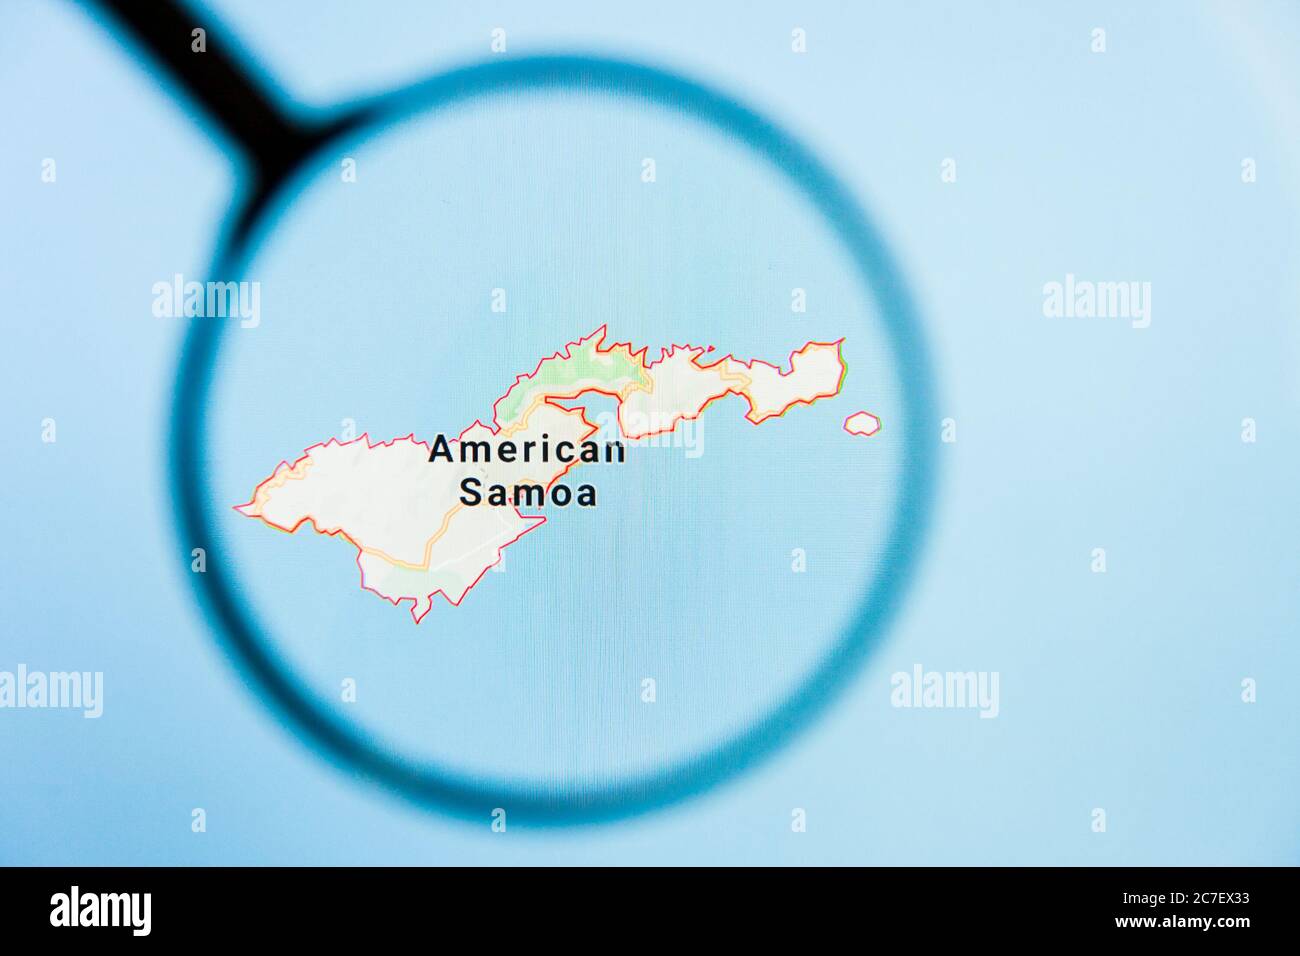 Los Angeles, California, USA - 15 March 2019: American Samoa, AS state of America visualization illustrative concept on display screen through Stock Photo